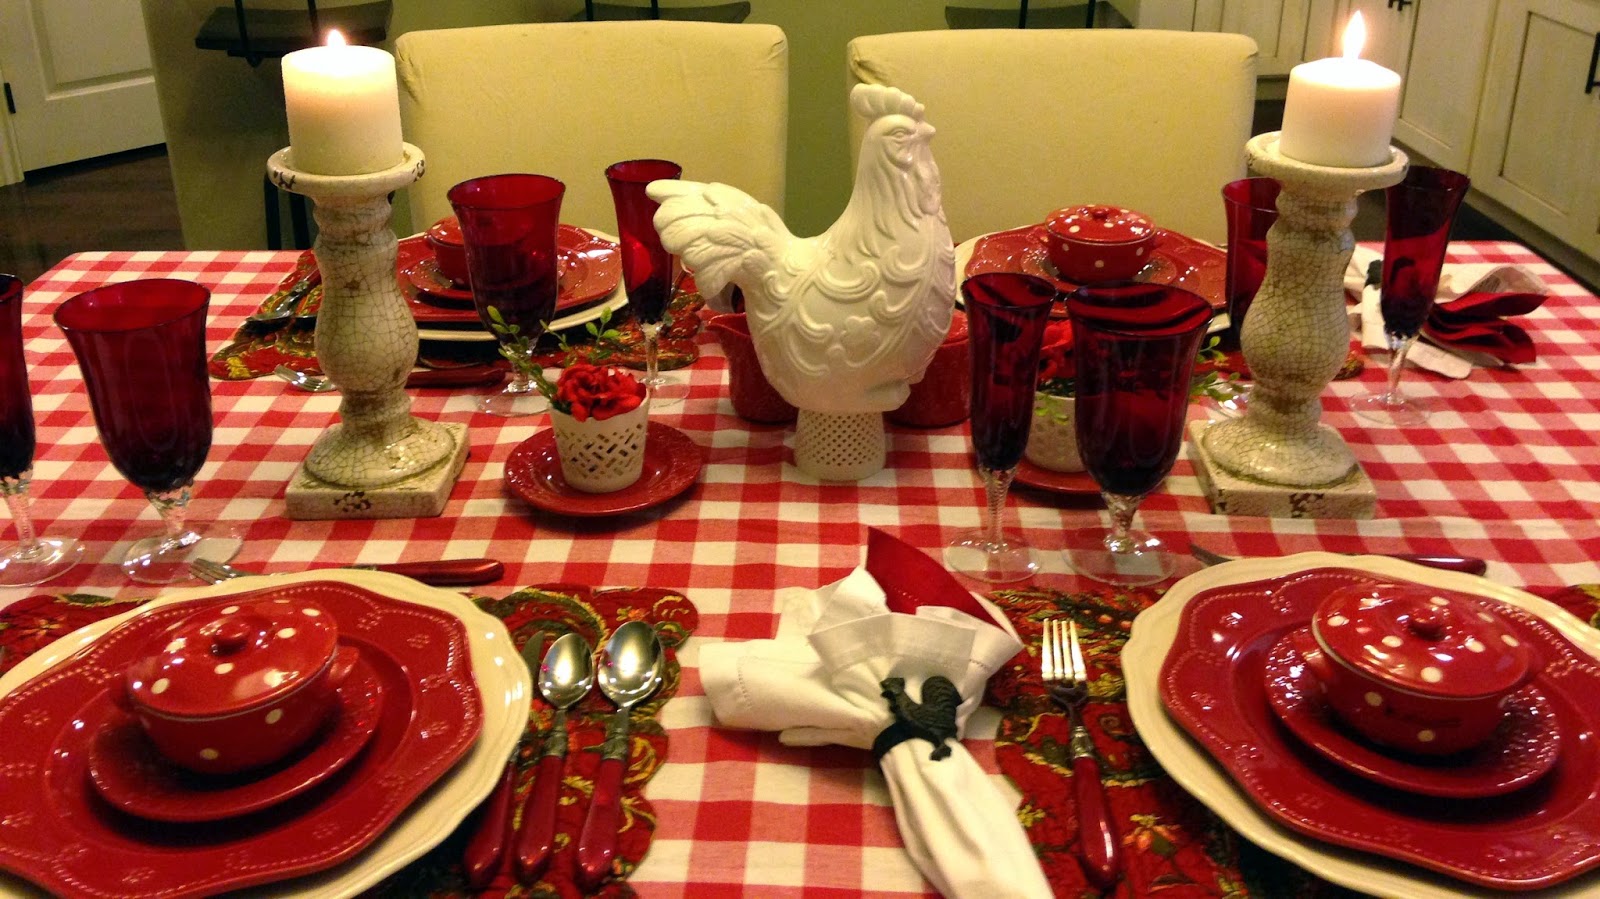 How'd You Do That?: VALENTINE'S DAY TABLESCAPE & MENU